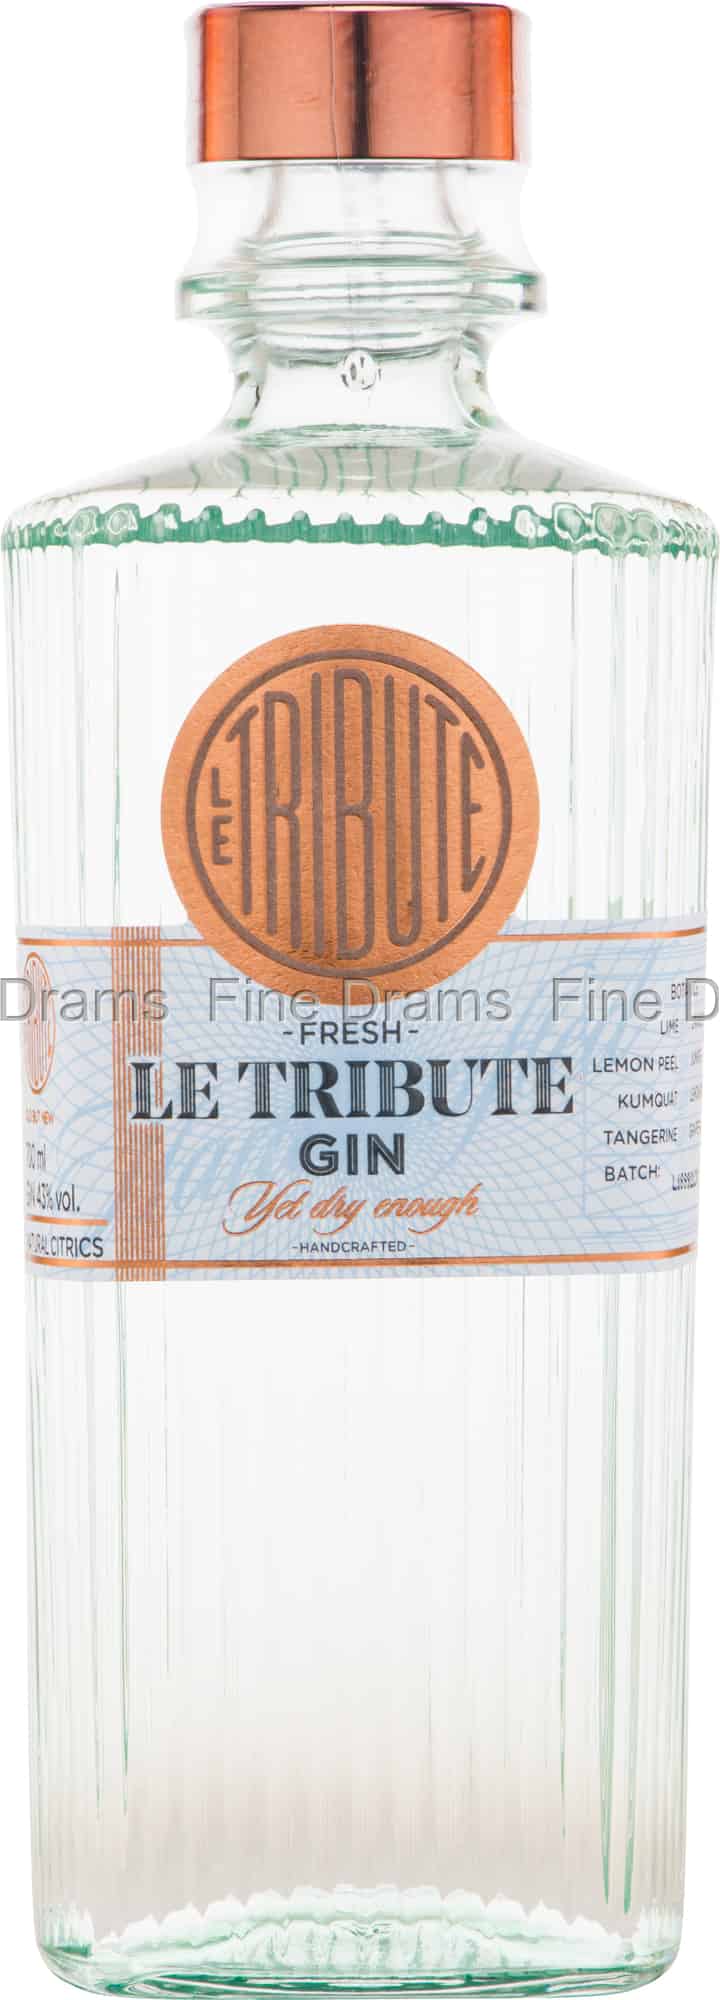 Le Tribute Gin, Ginferno's Best rated